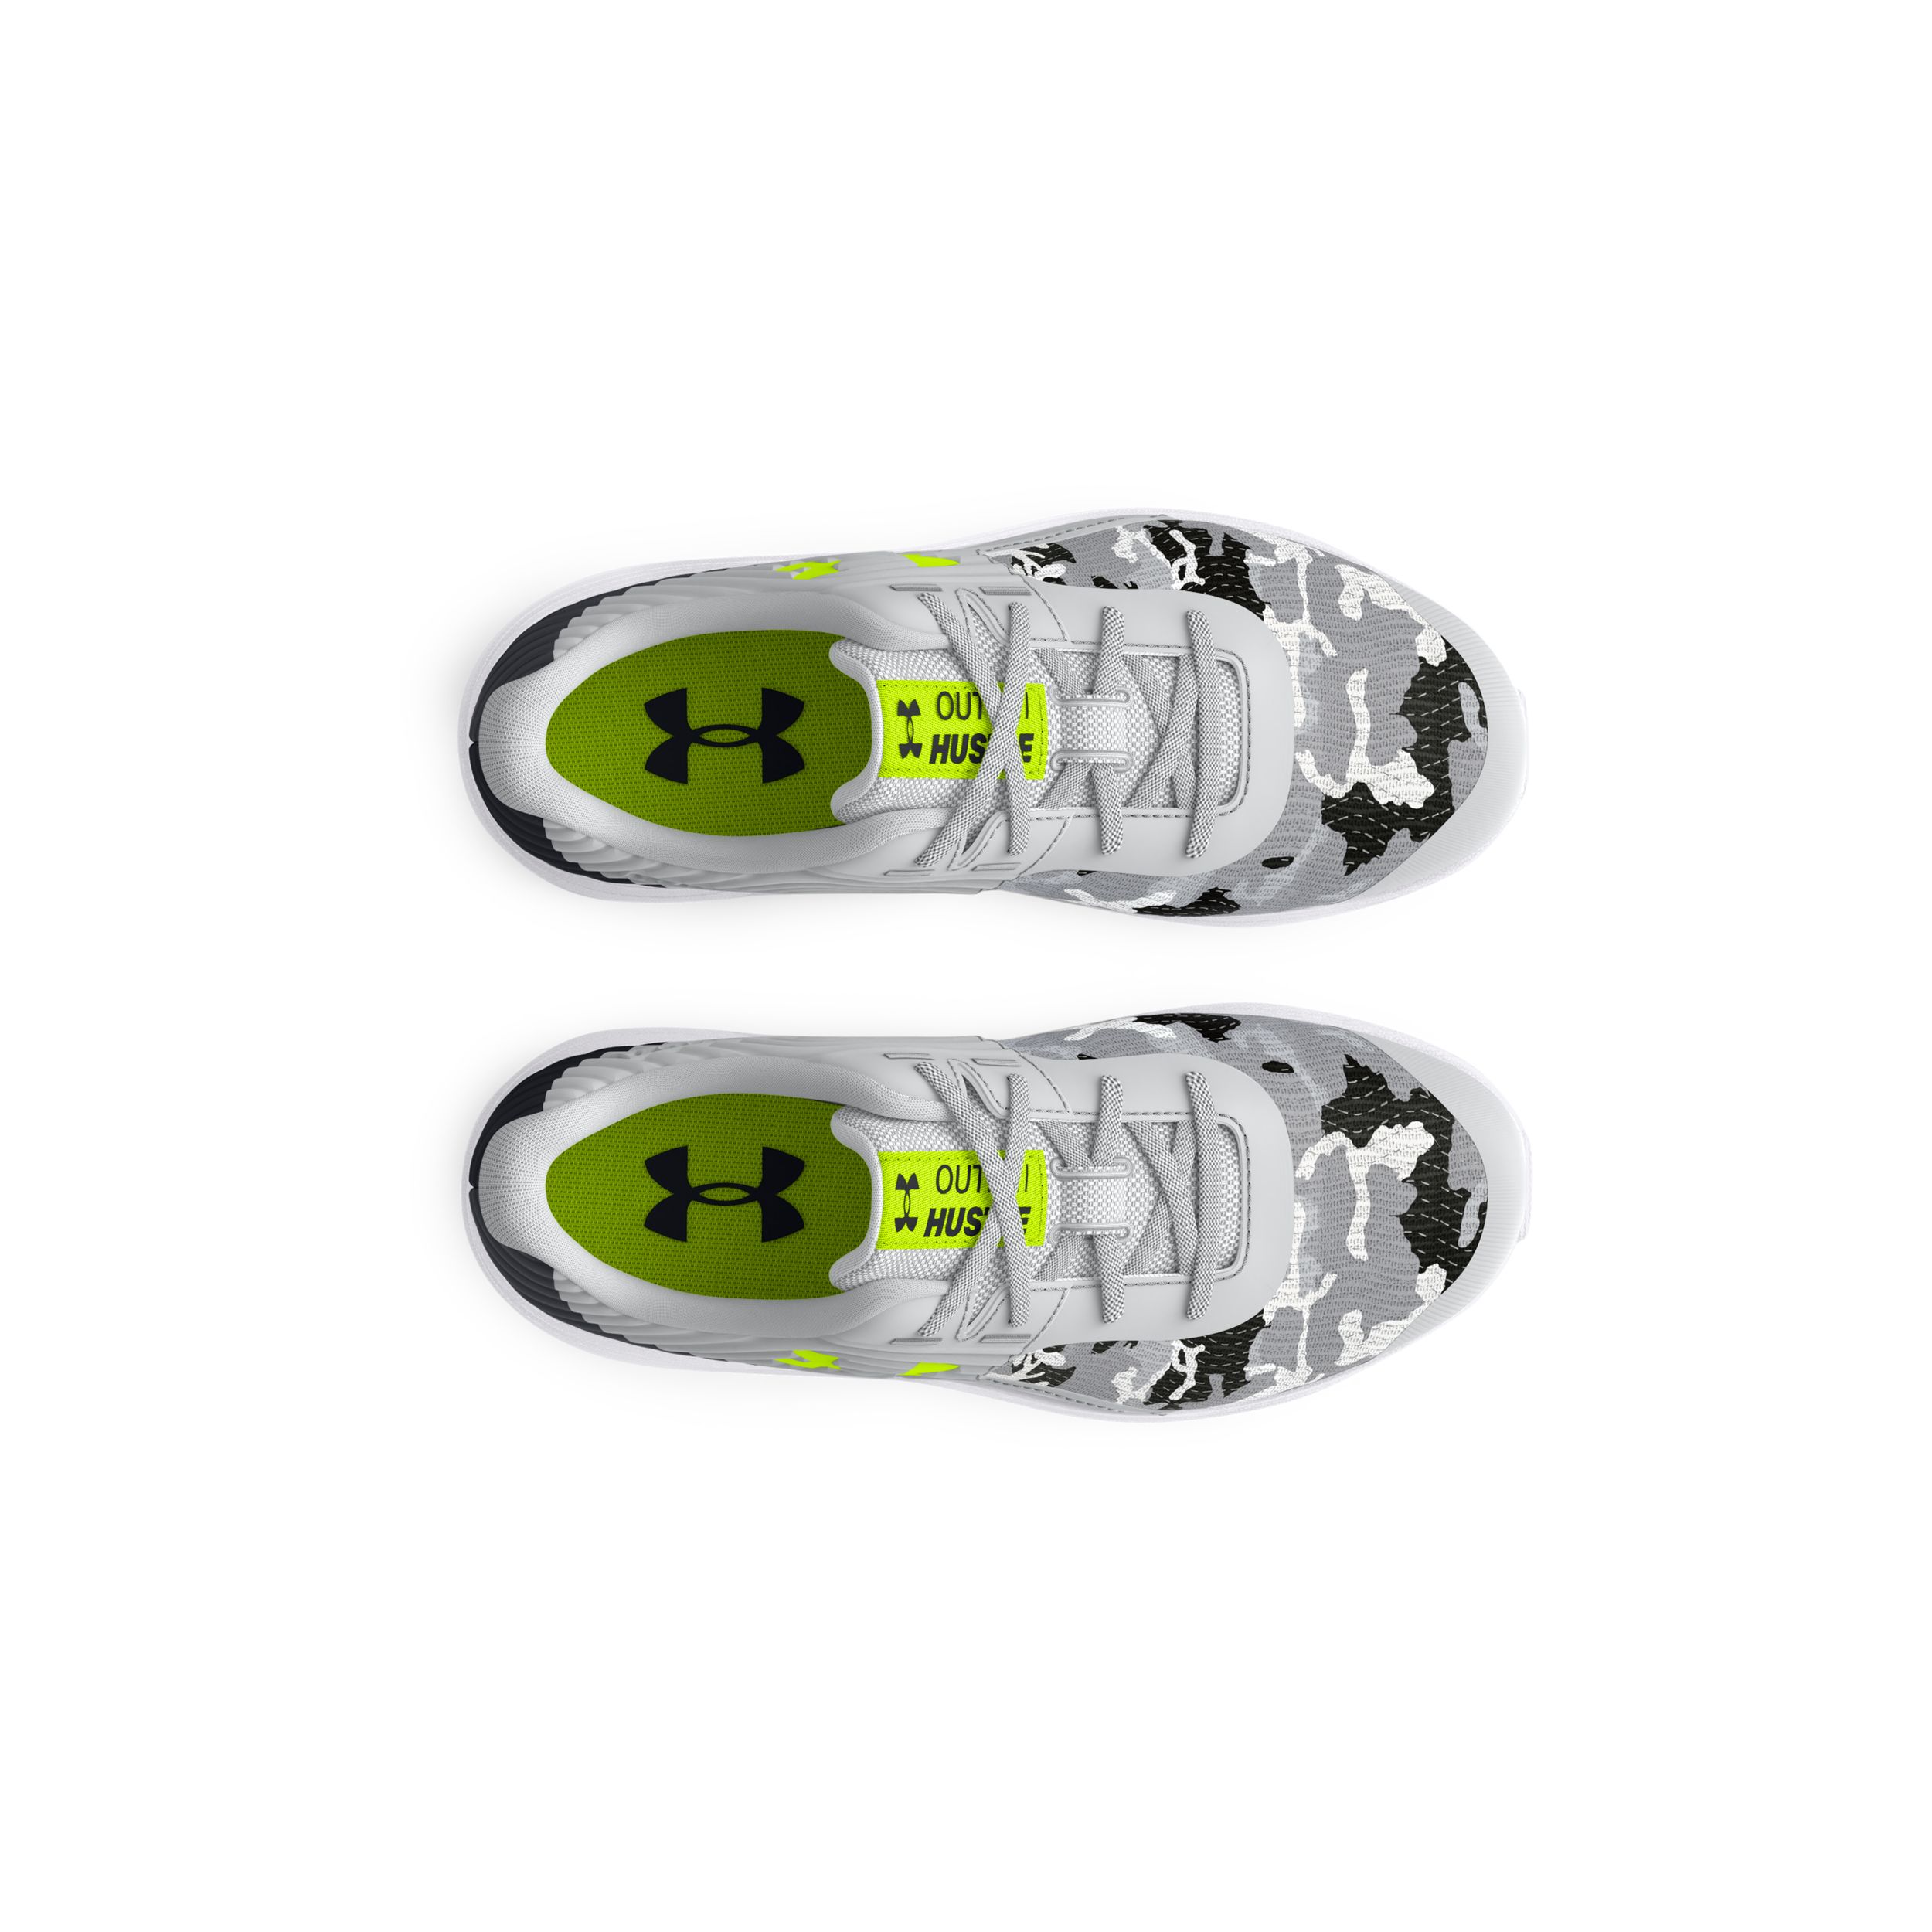 Under Armour Kids' Pre-School Charged Rogue 3 AL Laser Running Shoes